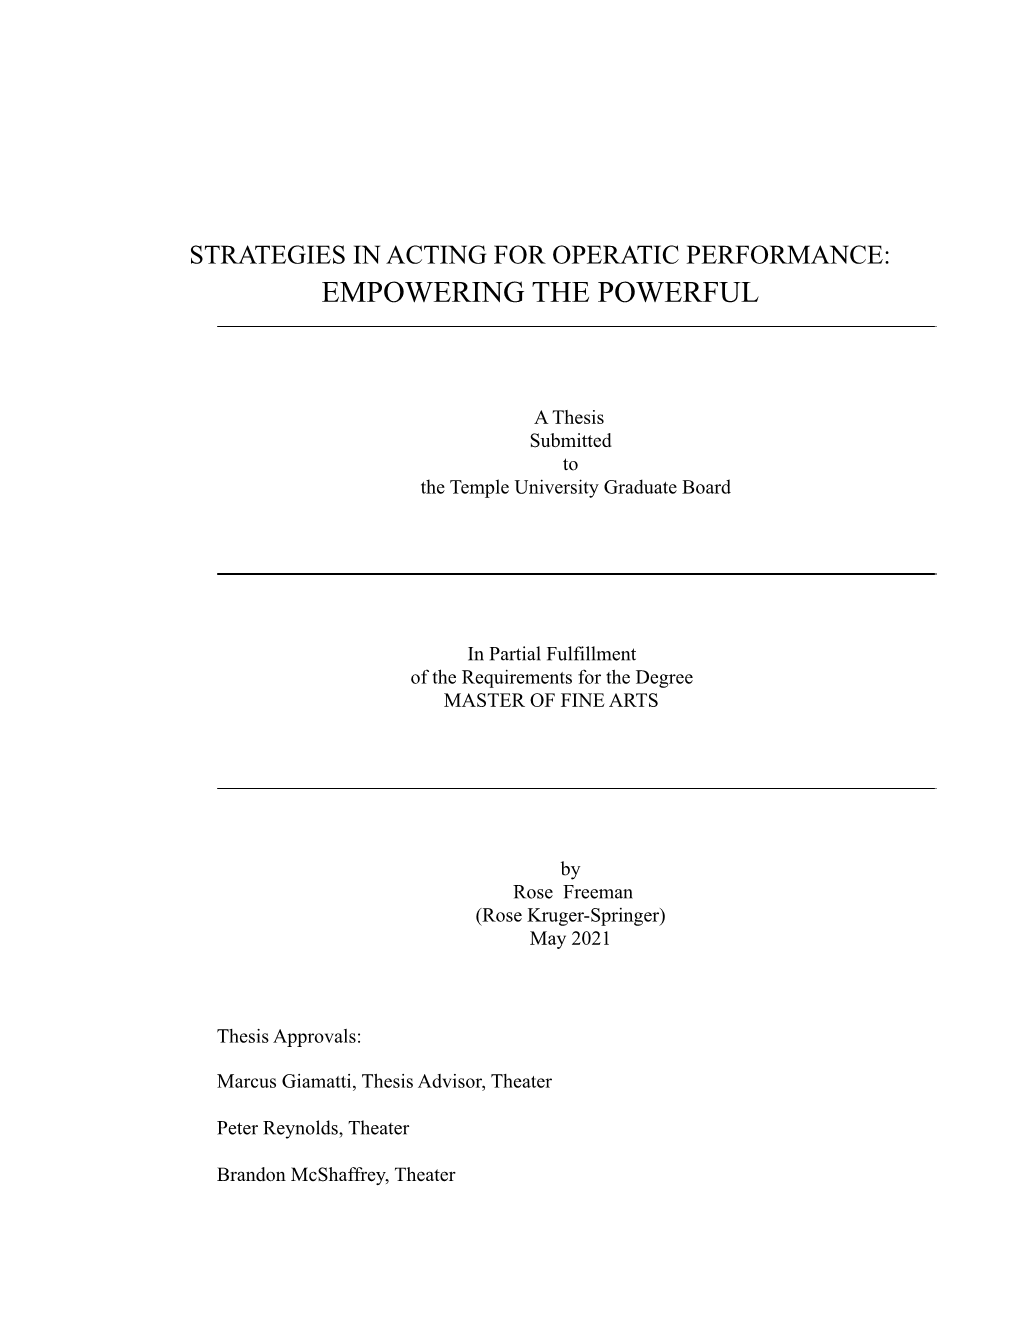 Strategies in Acting for Operatic Performance: Empowering the Powerful